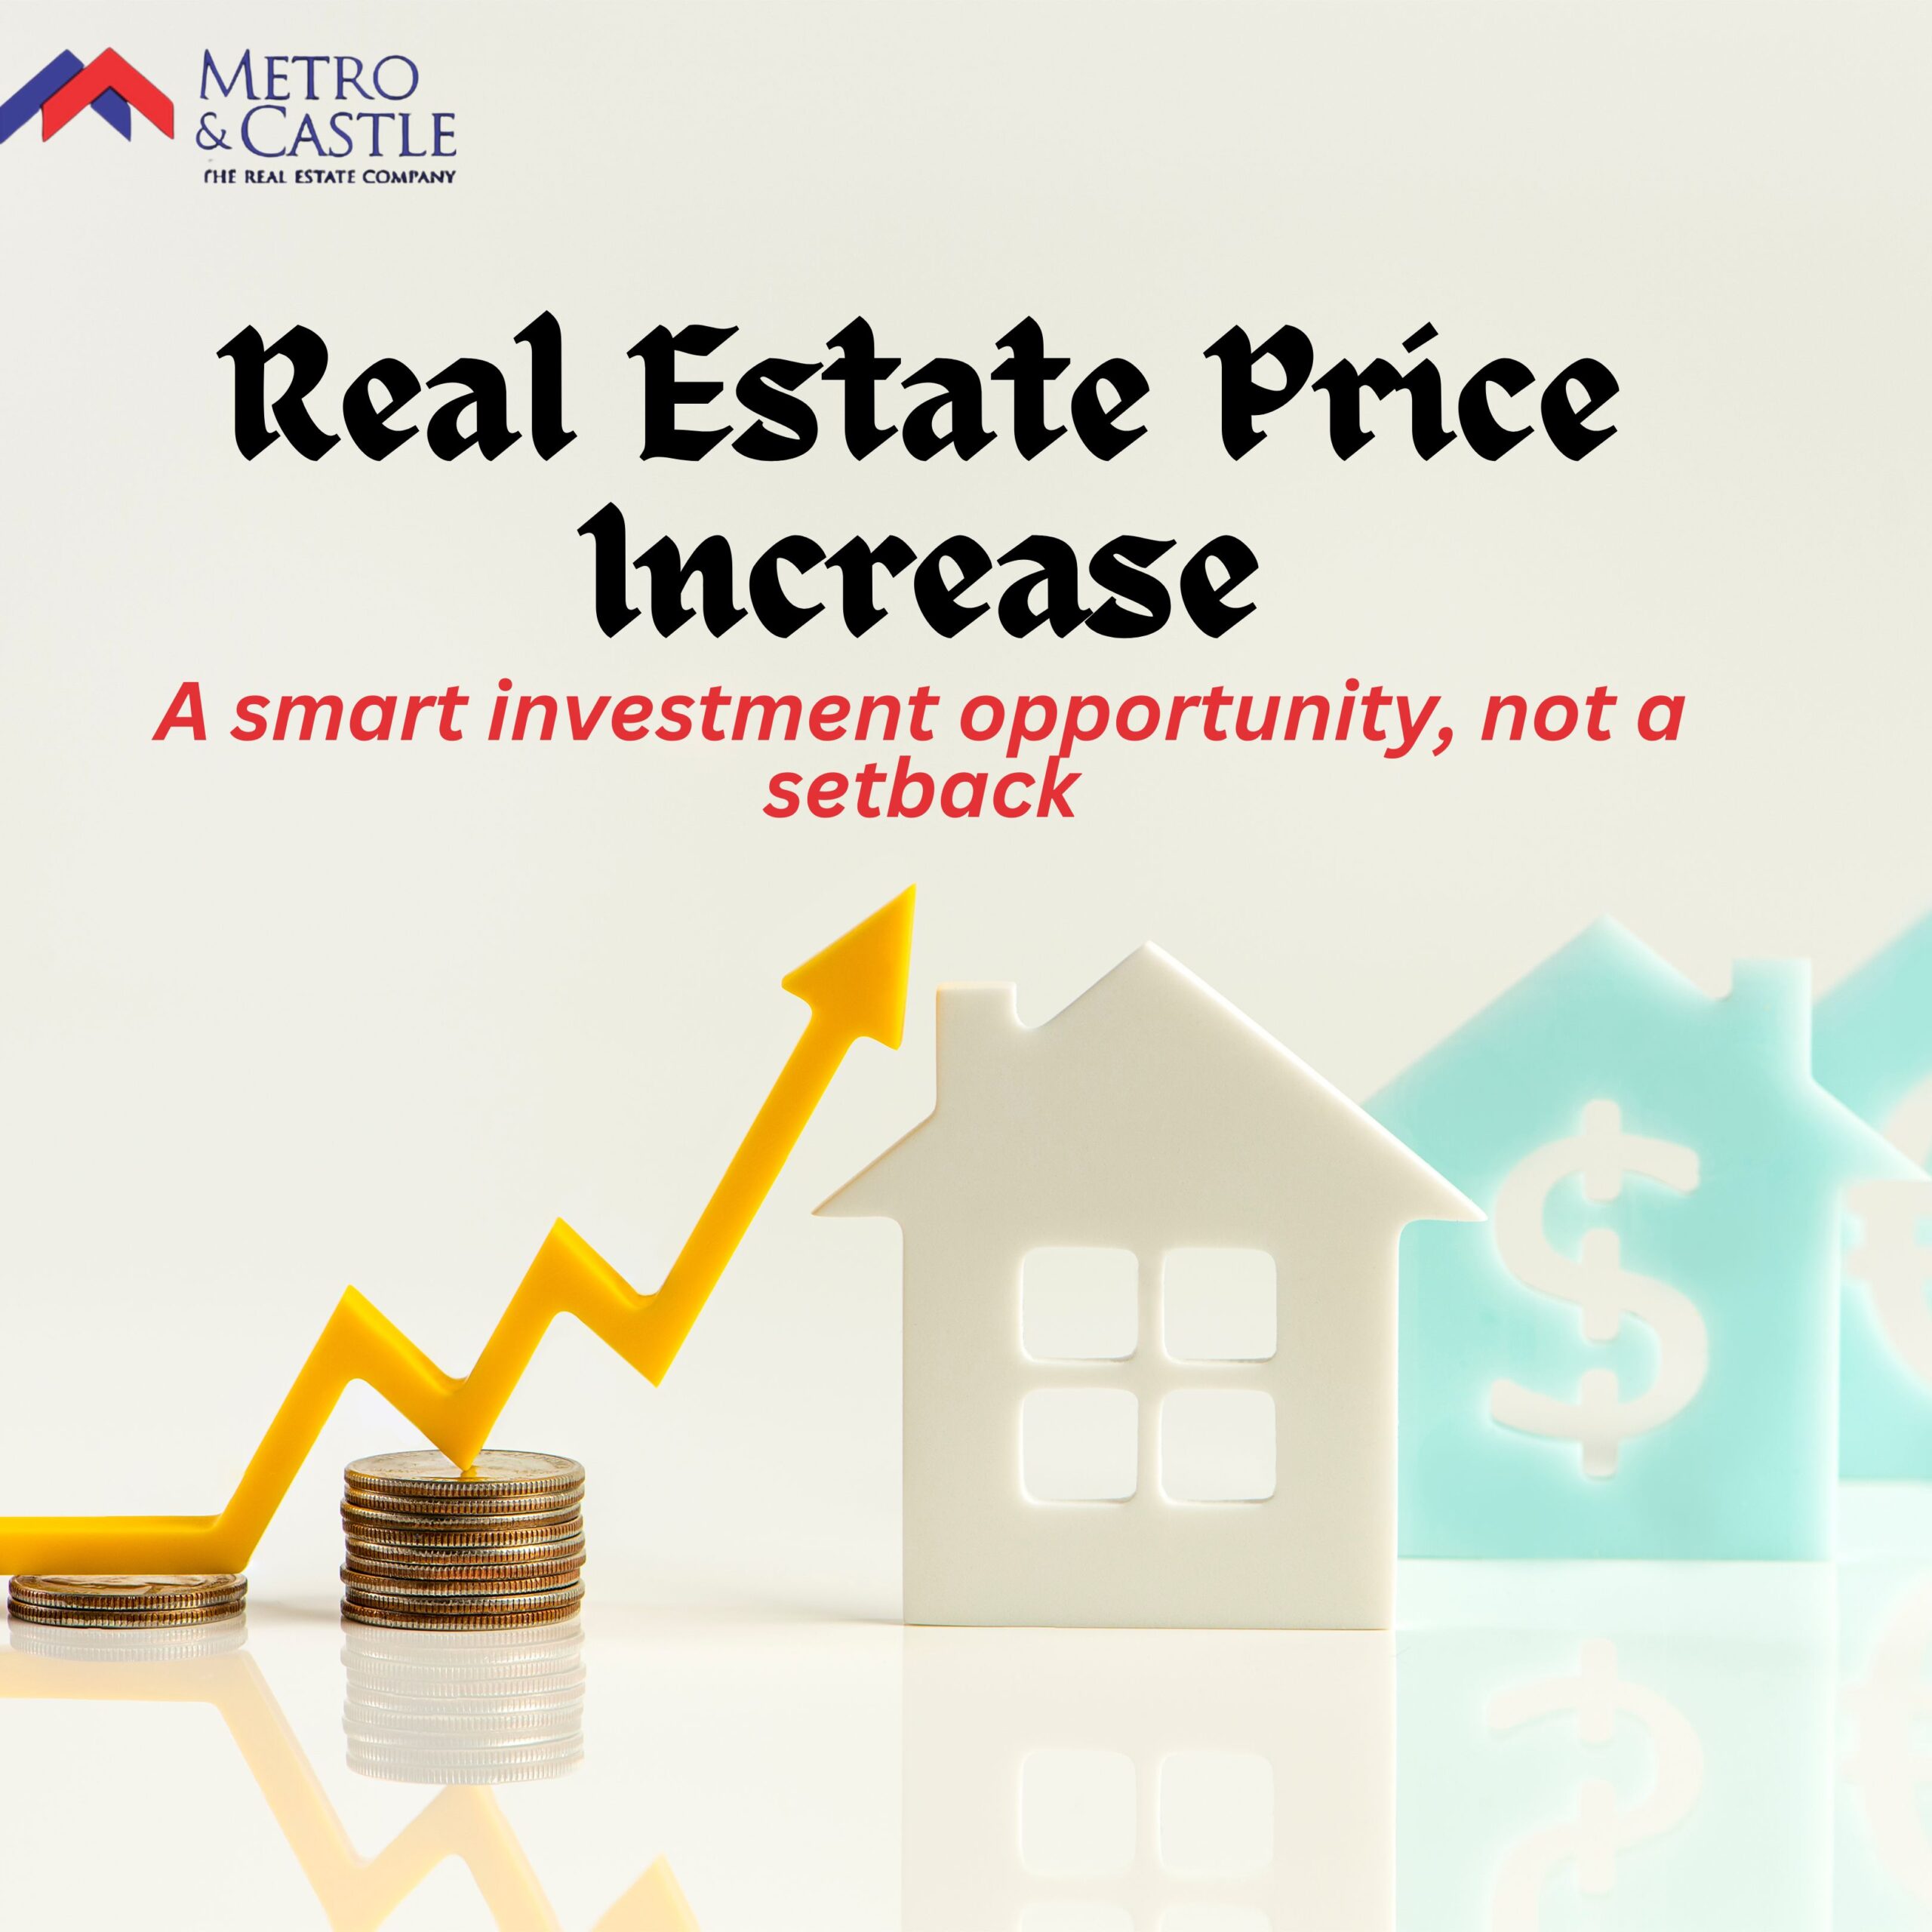 Real Estate Price Increase: A Smart Investment Opportunity, Not a Setback